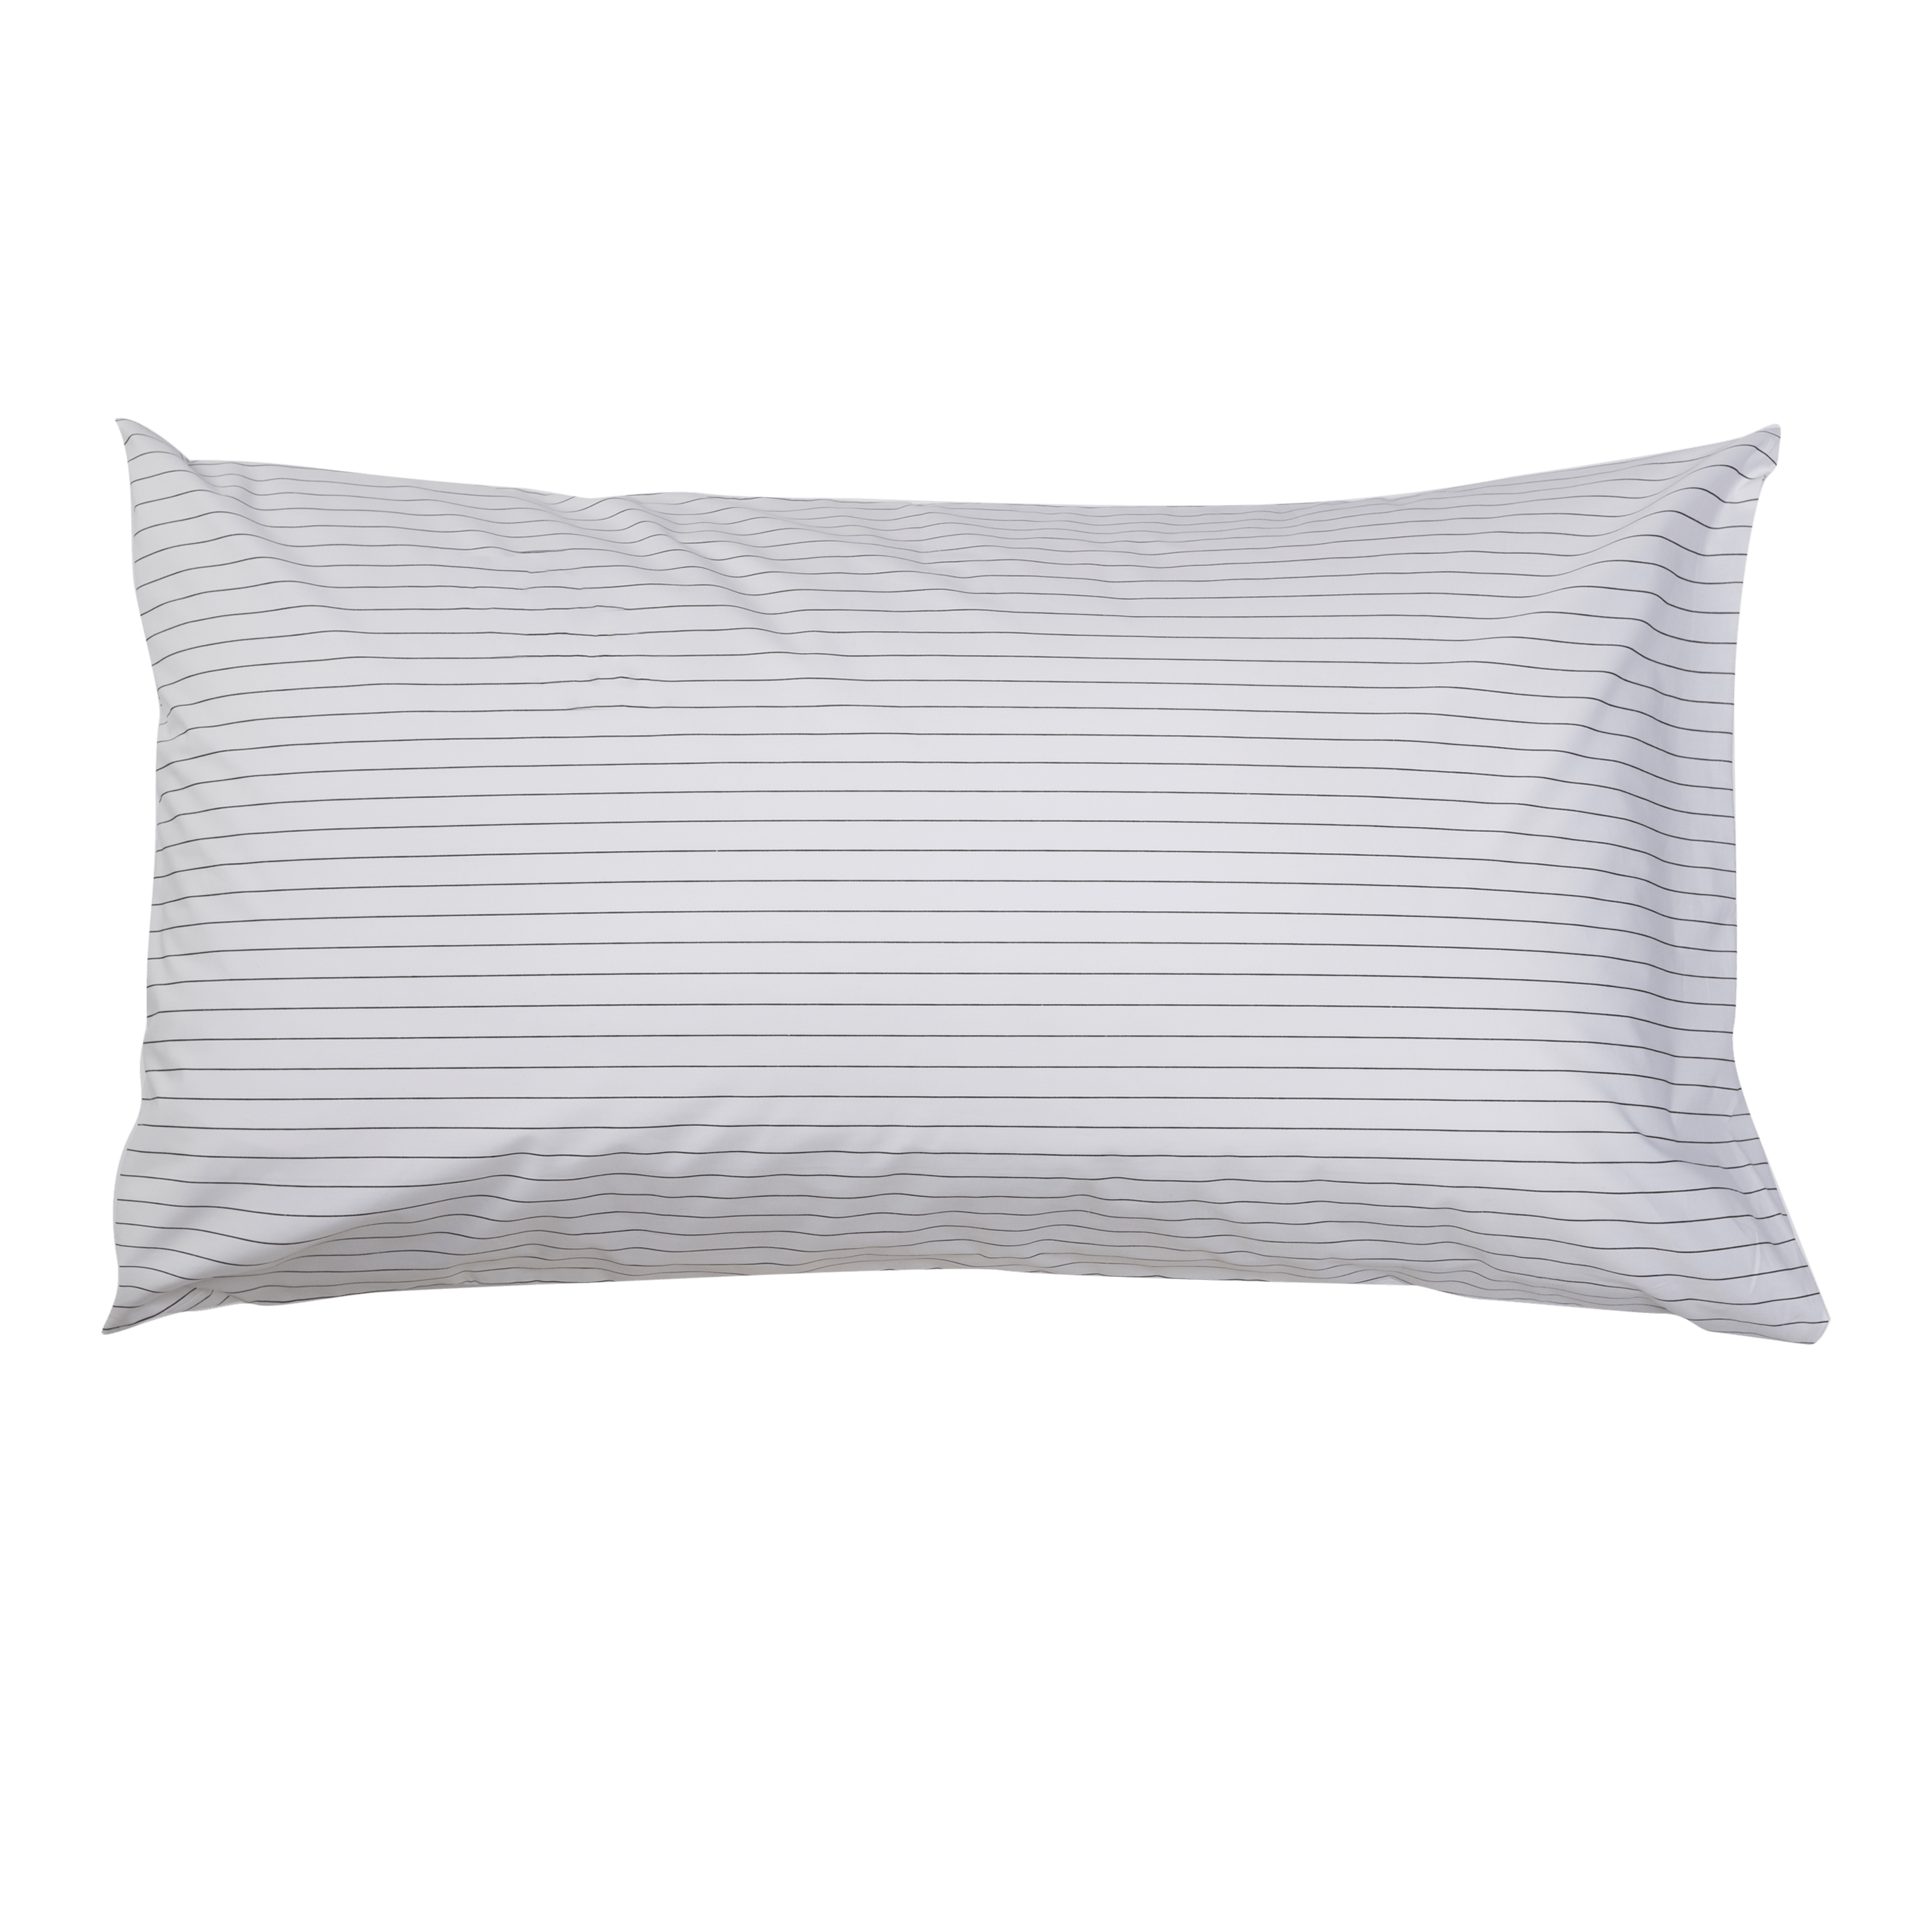 Pillow with Essential Collection Percale Pillowcase in Charcoal Stripe